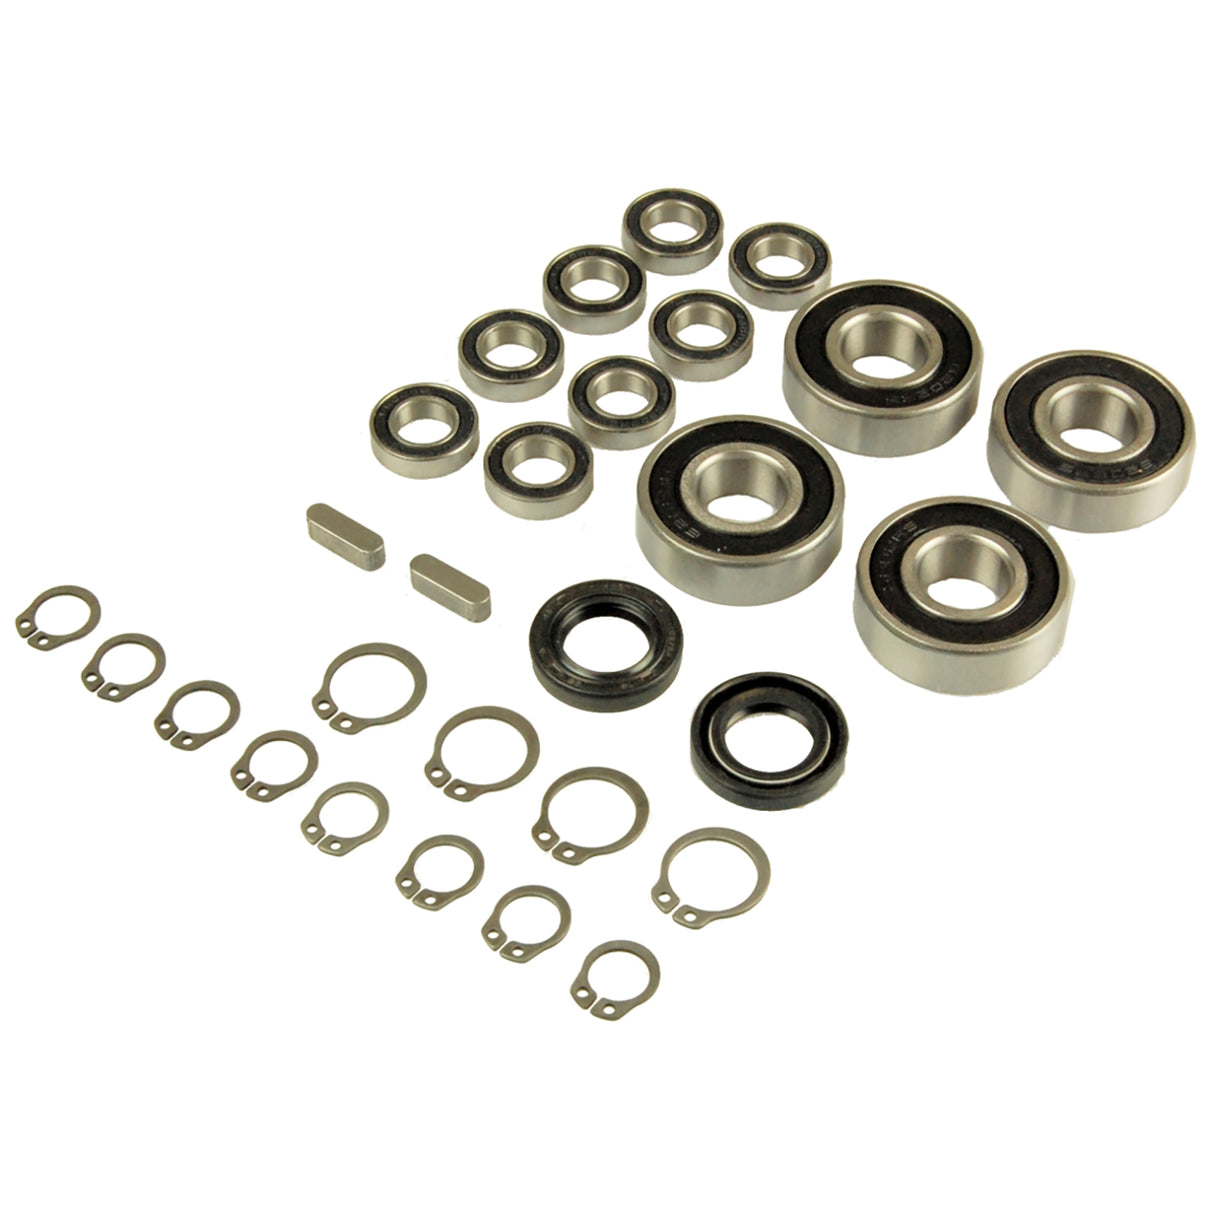 Overhaul kit brush motor AIR Lely A3 and Lely A4 Bearings-Gaskets